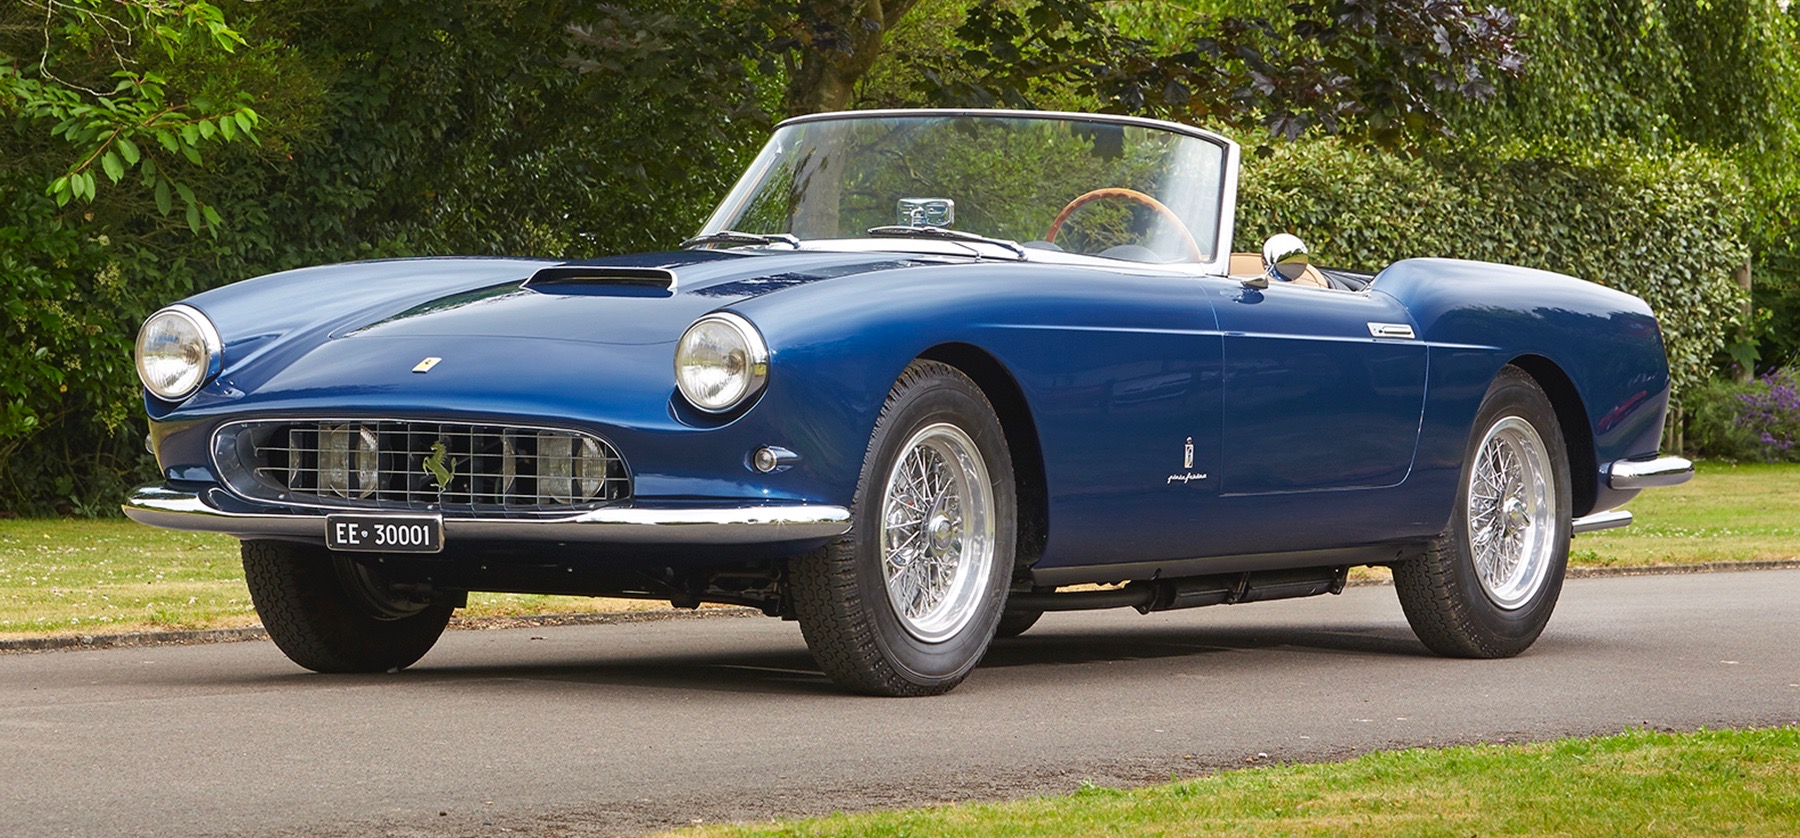 1959 250 GT Series I cabriolet could bring $5 million to $7 million | Gooding photo by Matt Howell